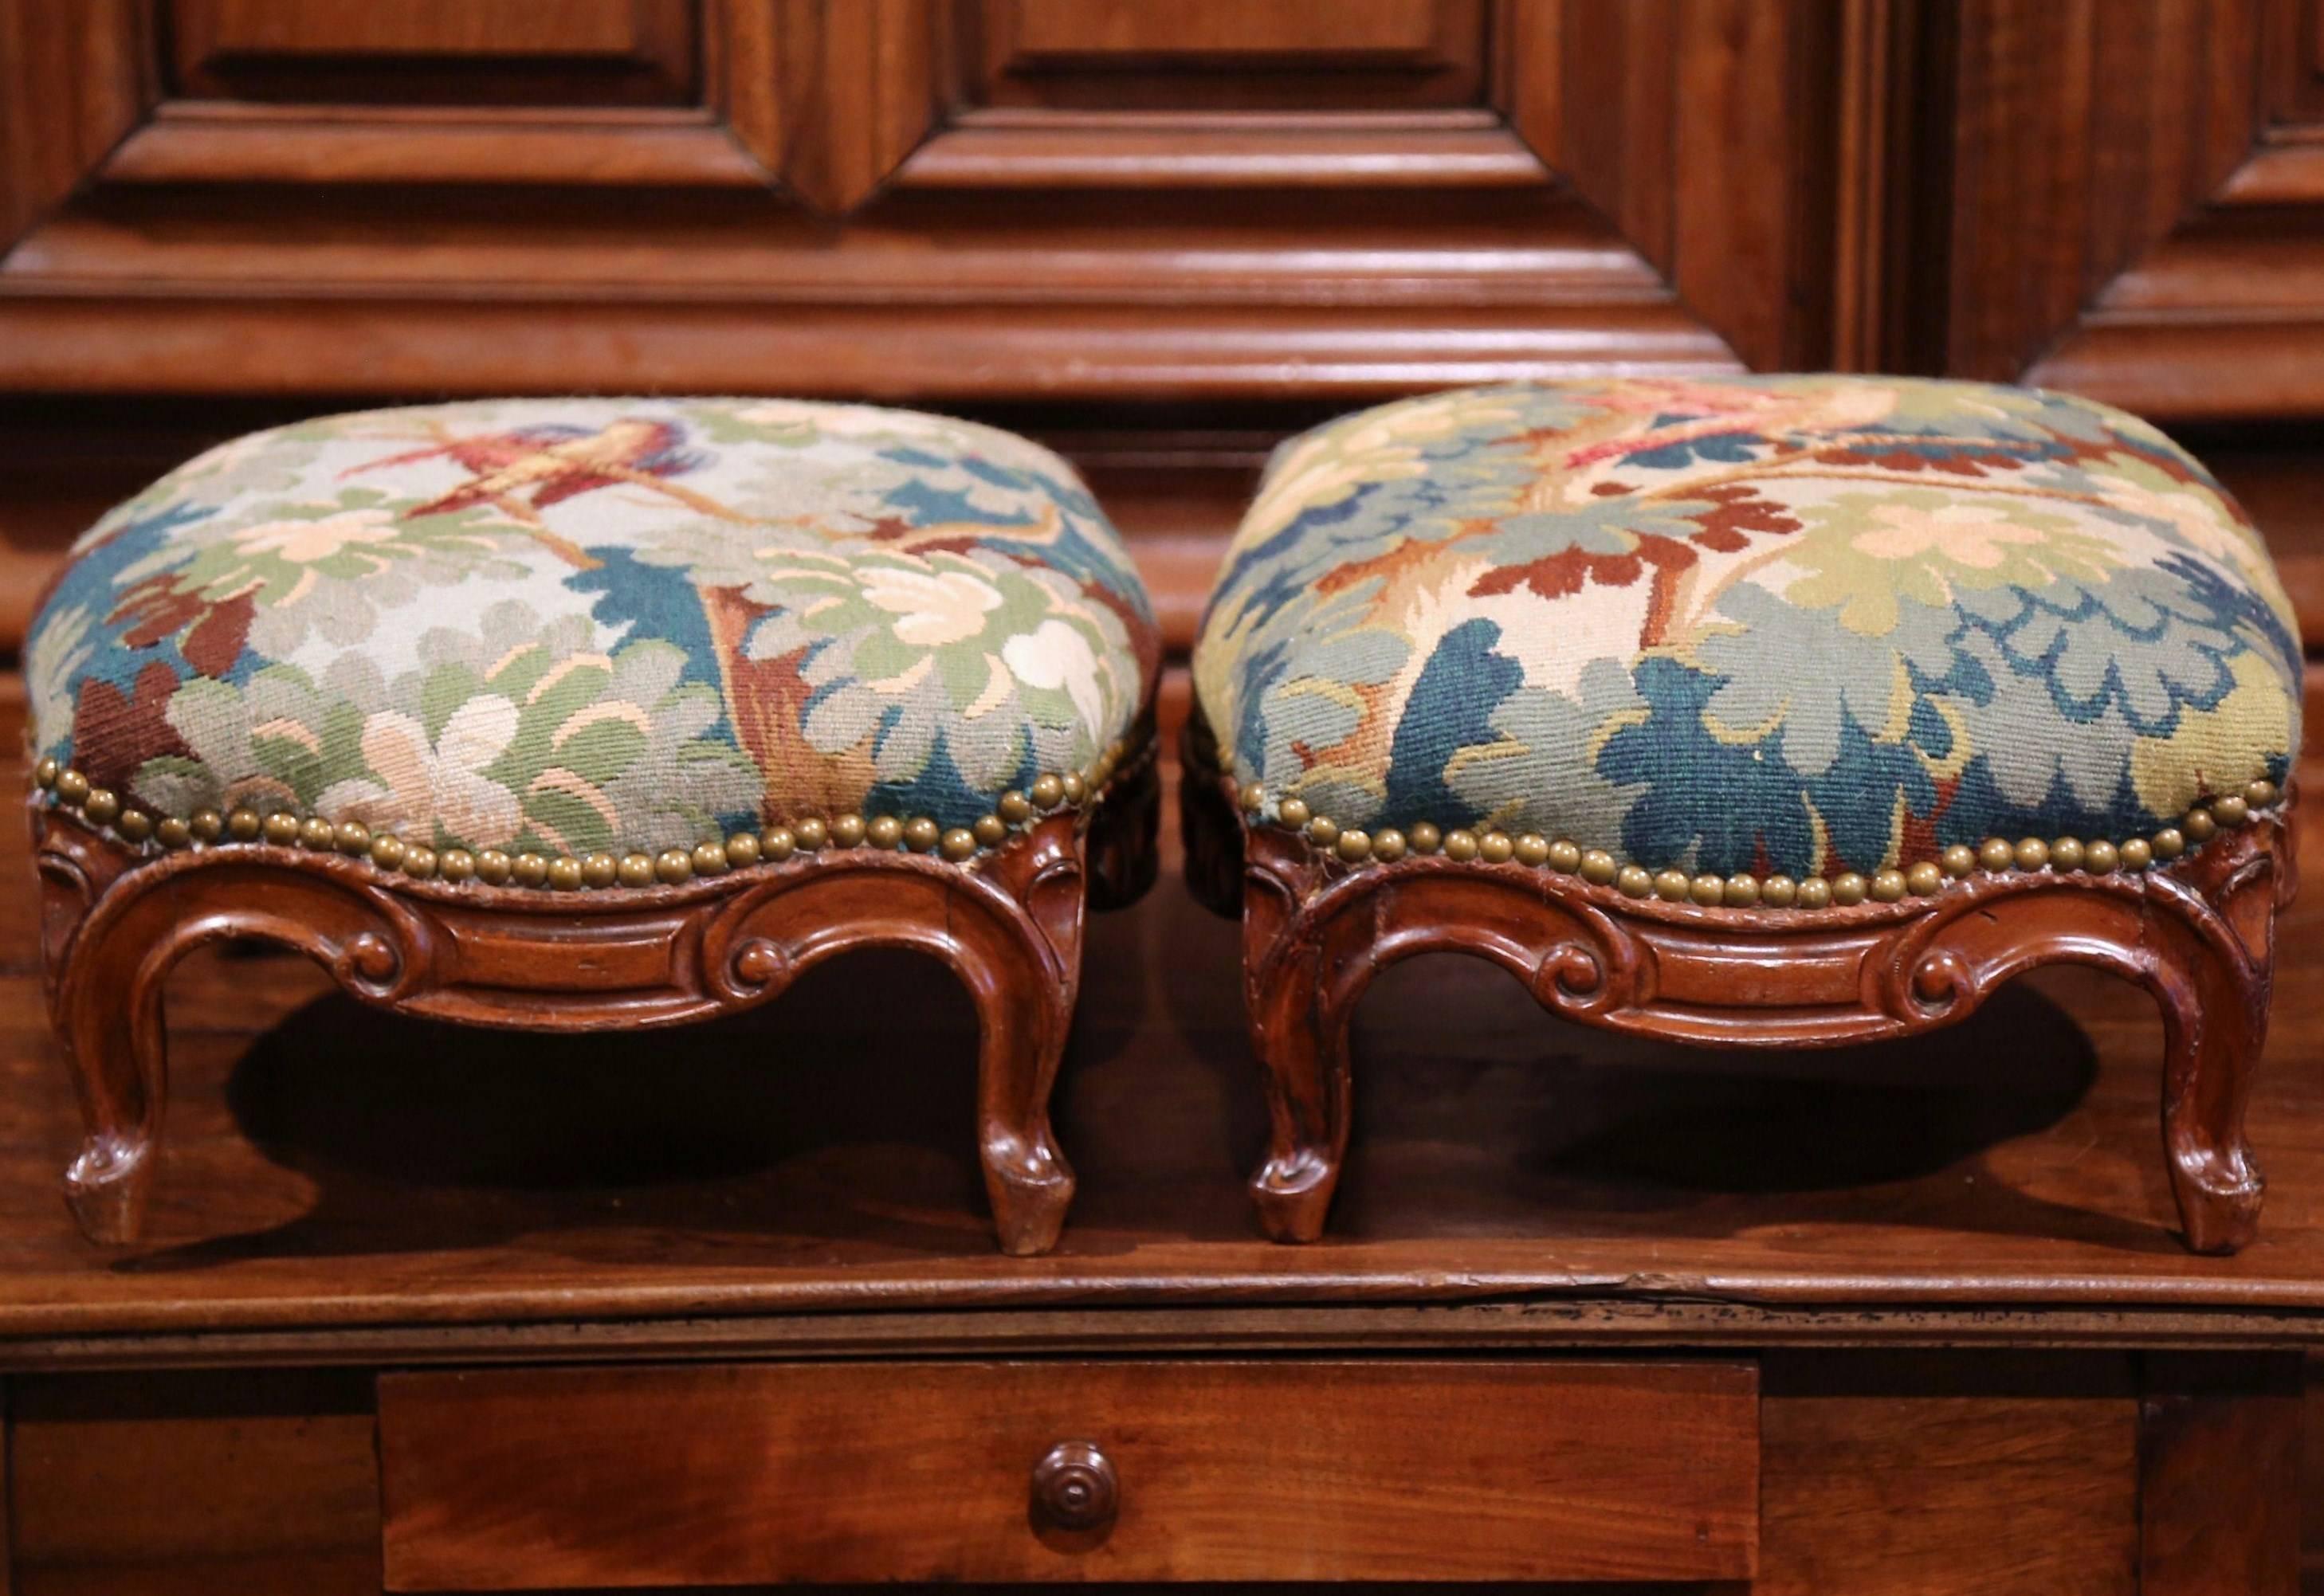 Incorporate neoclassical beauty into your home with this exquisite pair of colorful Louis XV footstools. Crafted in Lyon, France, circa 1870, these carved stools feature small scrolled feet over a scalloped apron; they are upholstered with antique